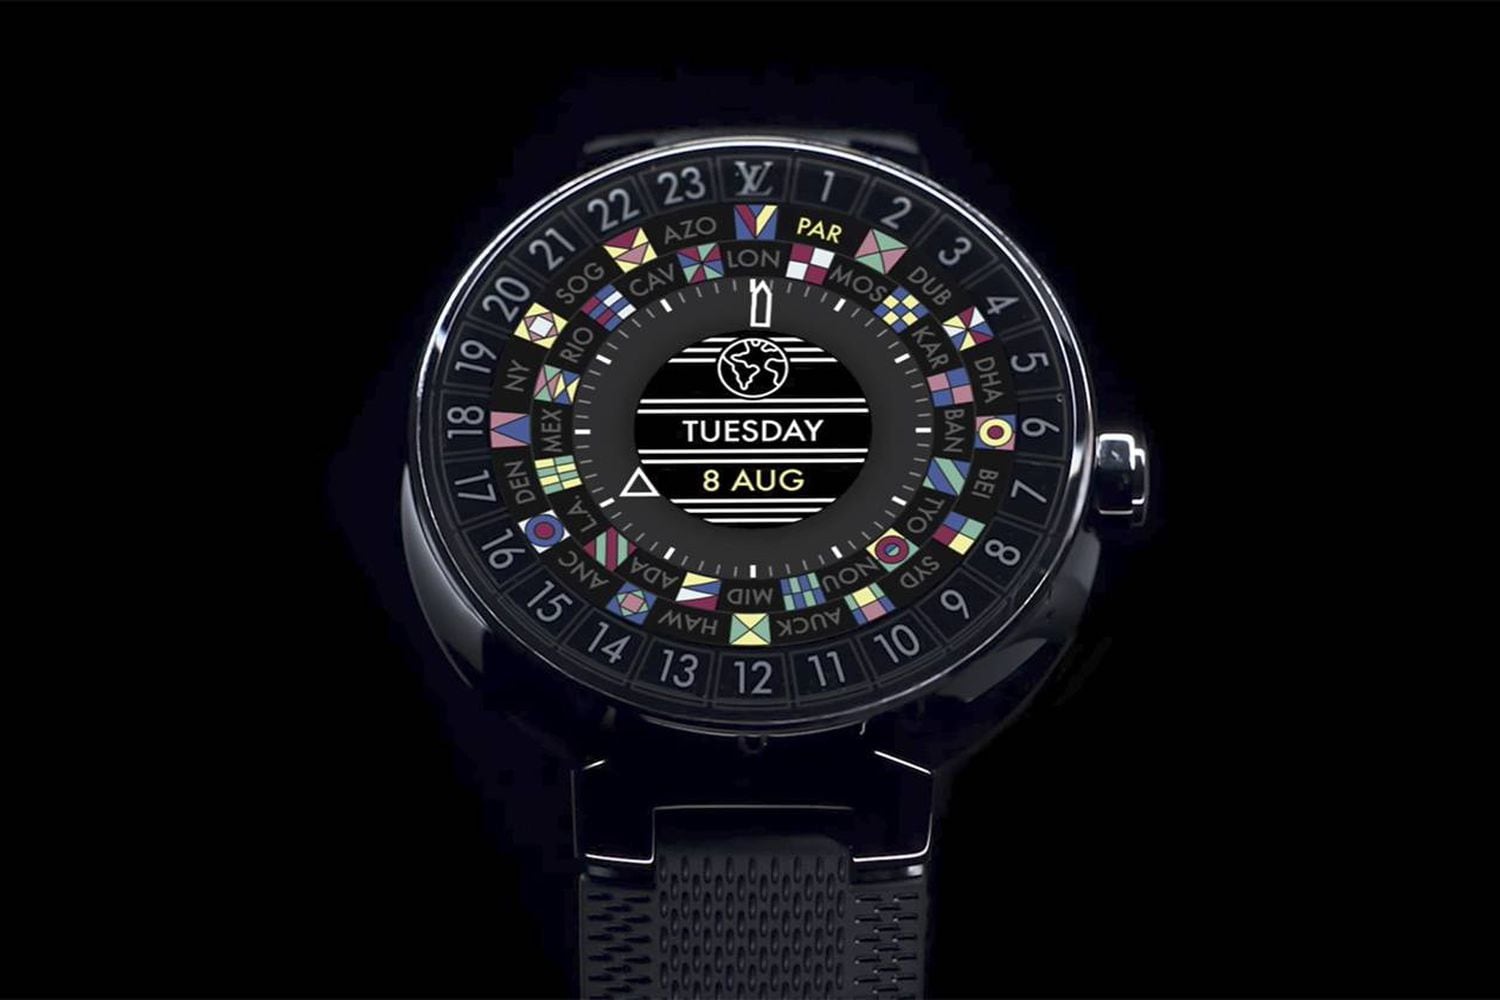 Time for fashionable tech: Louis Vuitton's new smartwatch